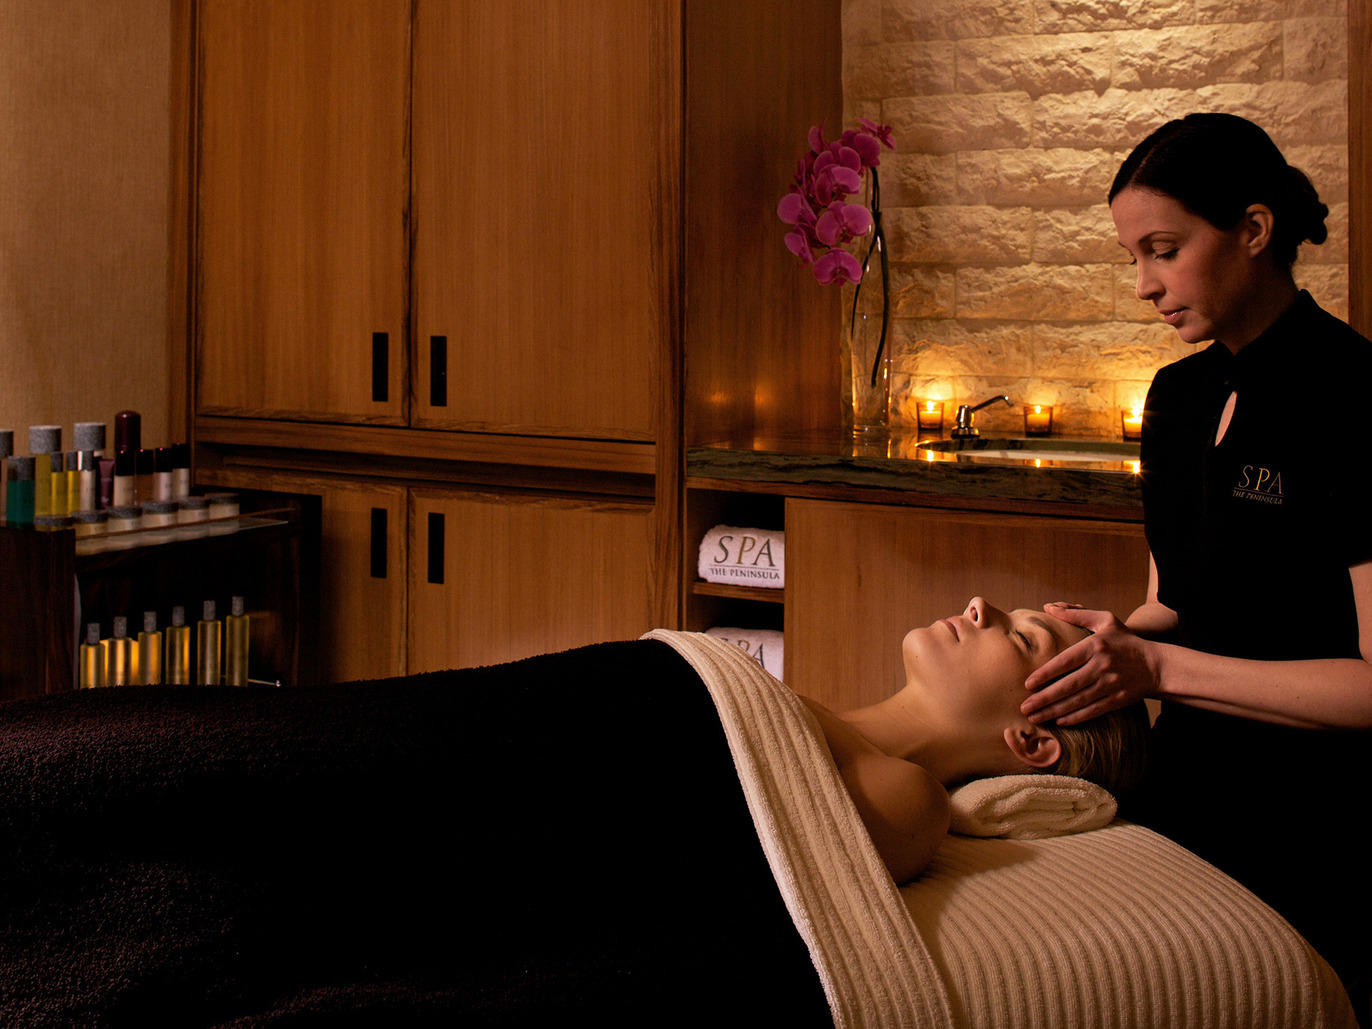 Spa Treatments At The Best Spas In Chicago